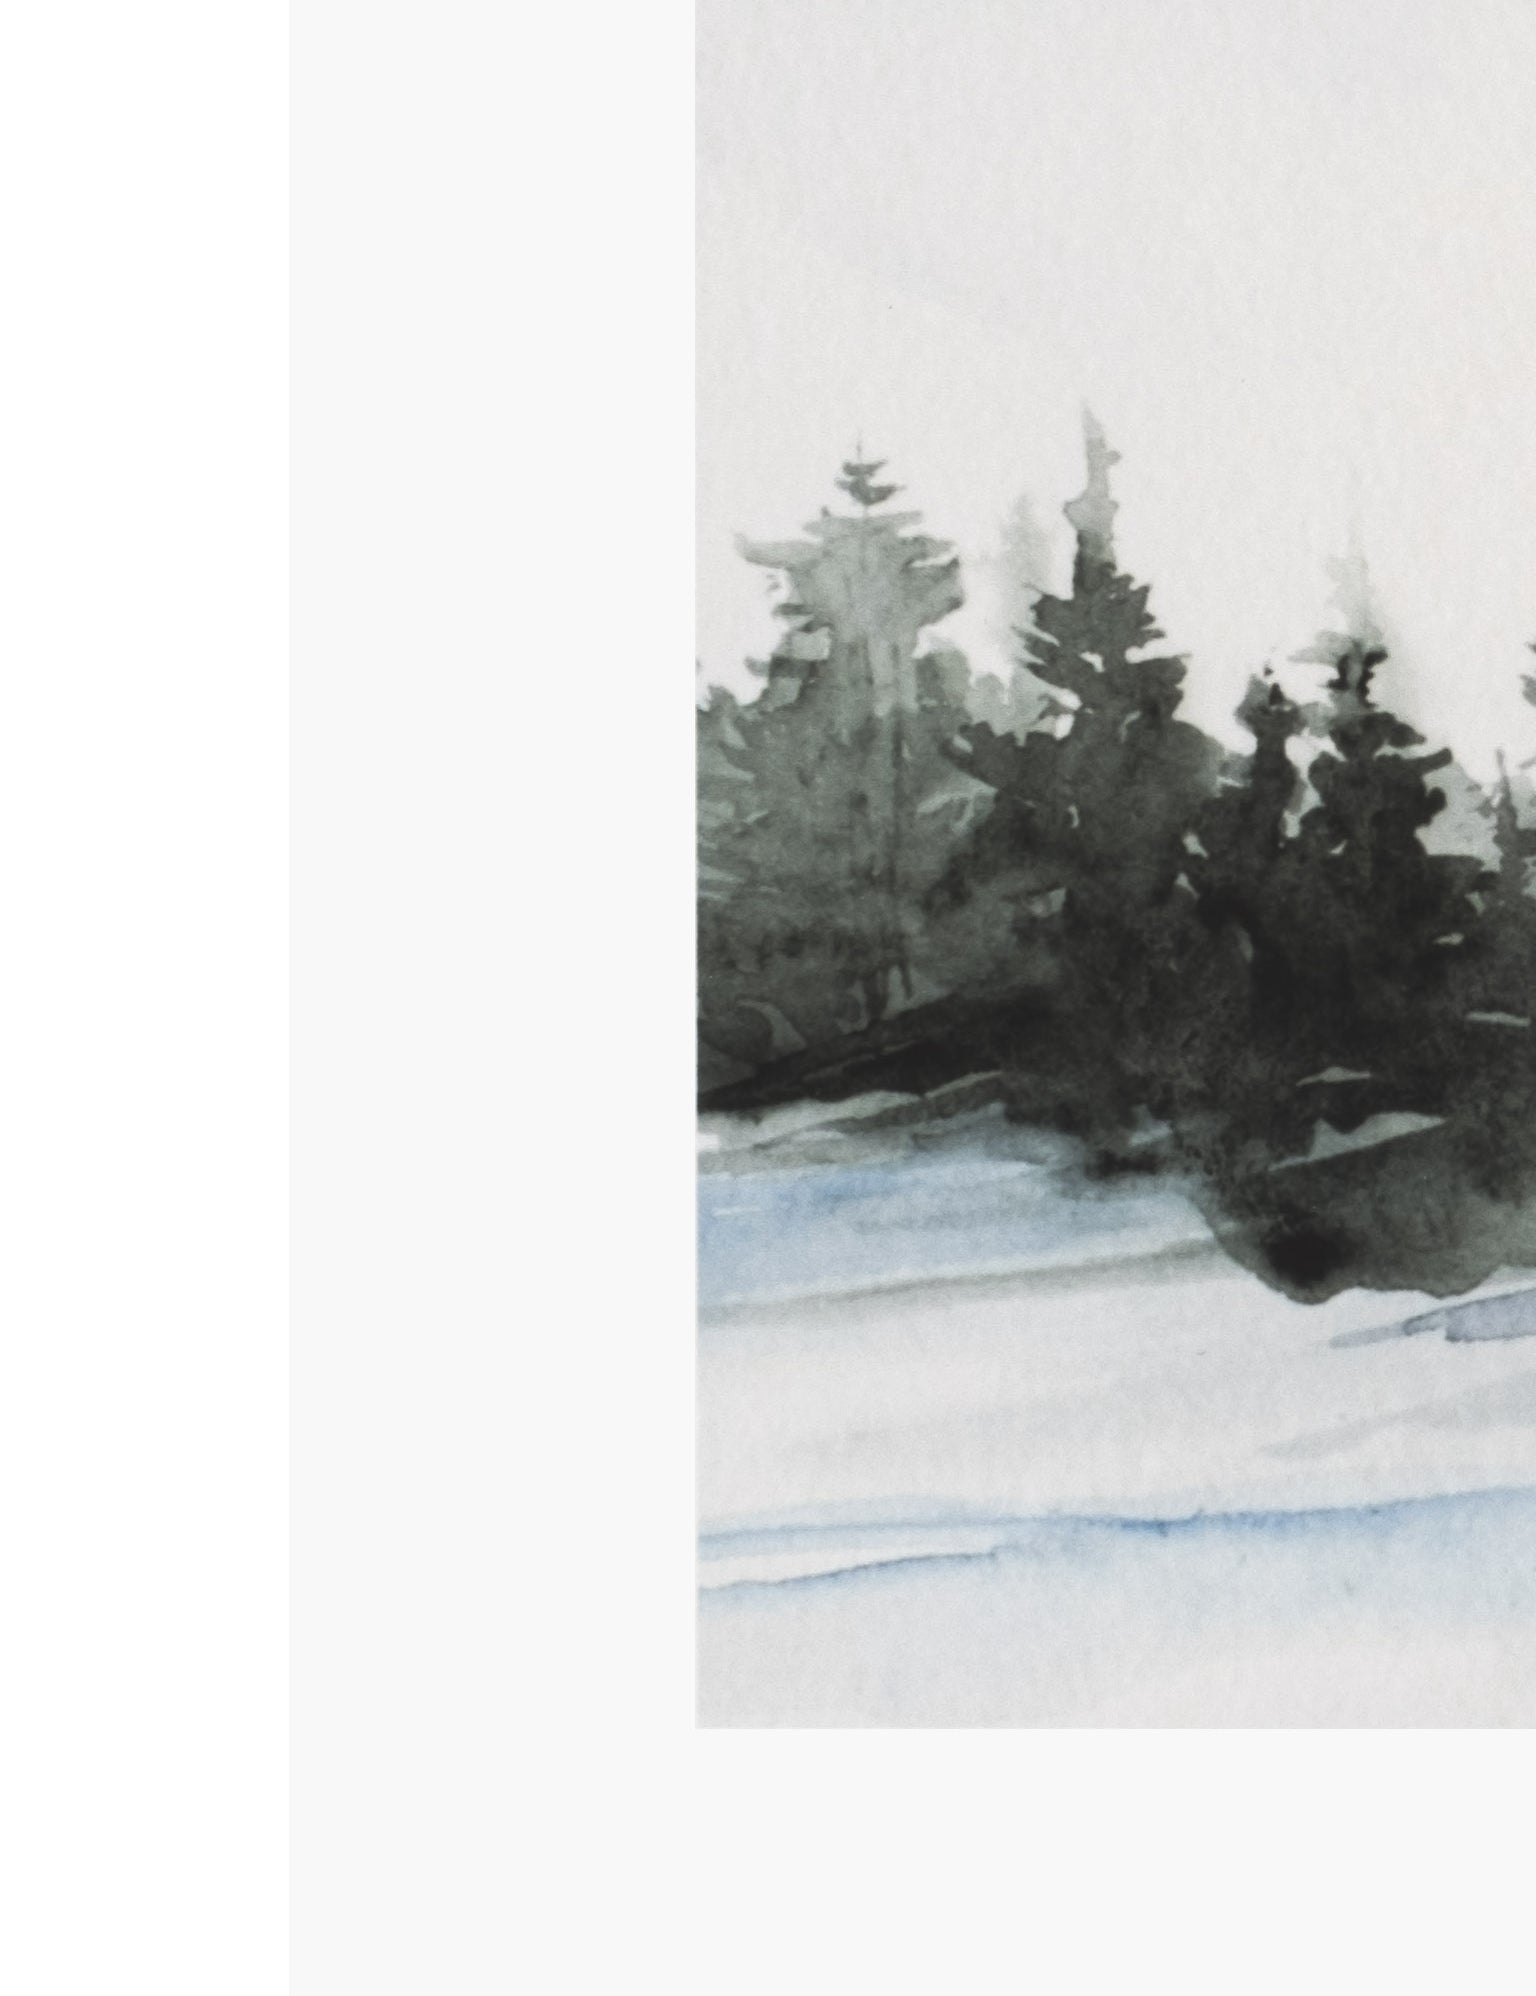 Evergreens in the Distance I Art Print